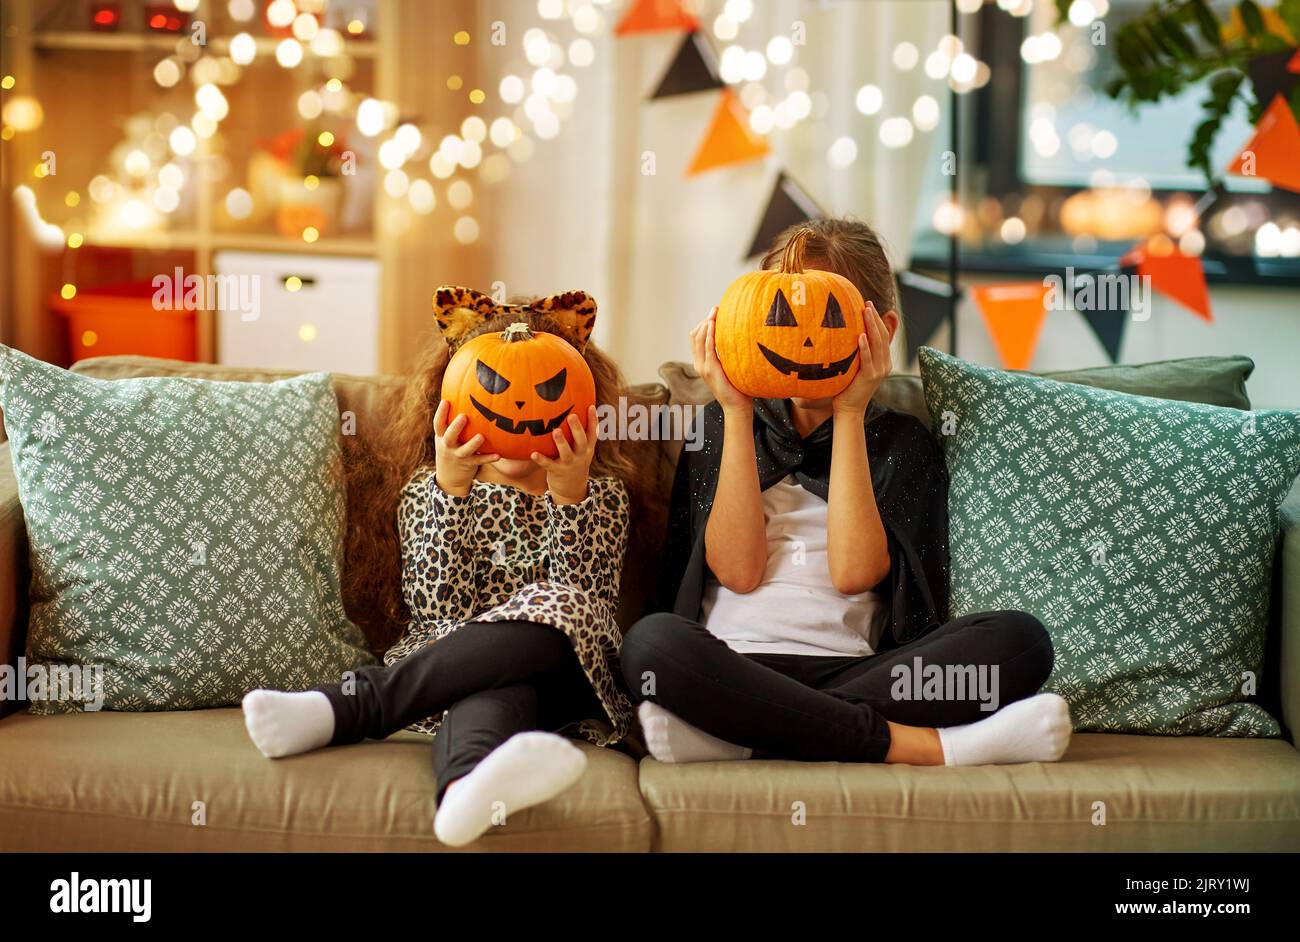 girls in halloween costumes with pumpkins at home Stock Photo